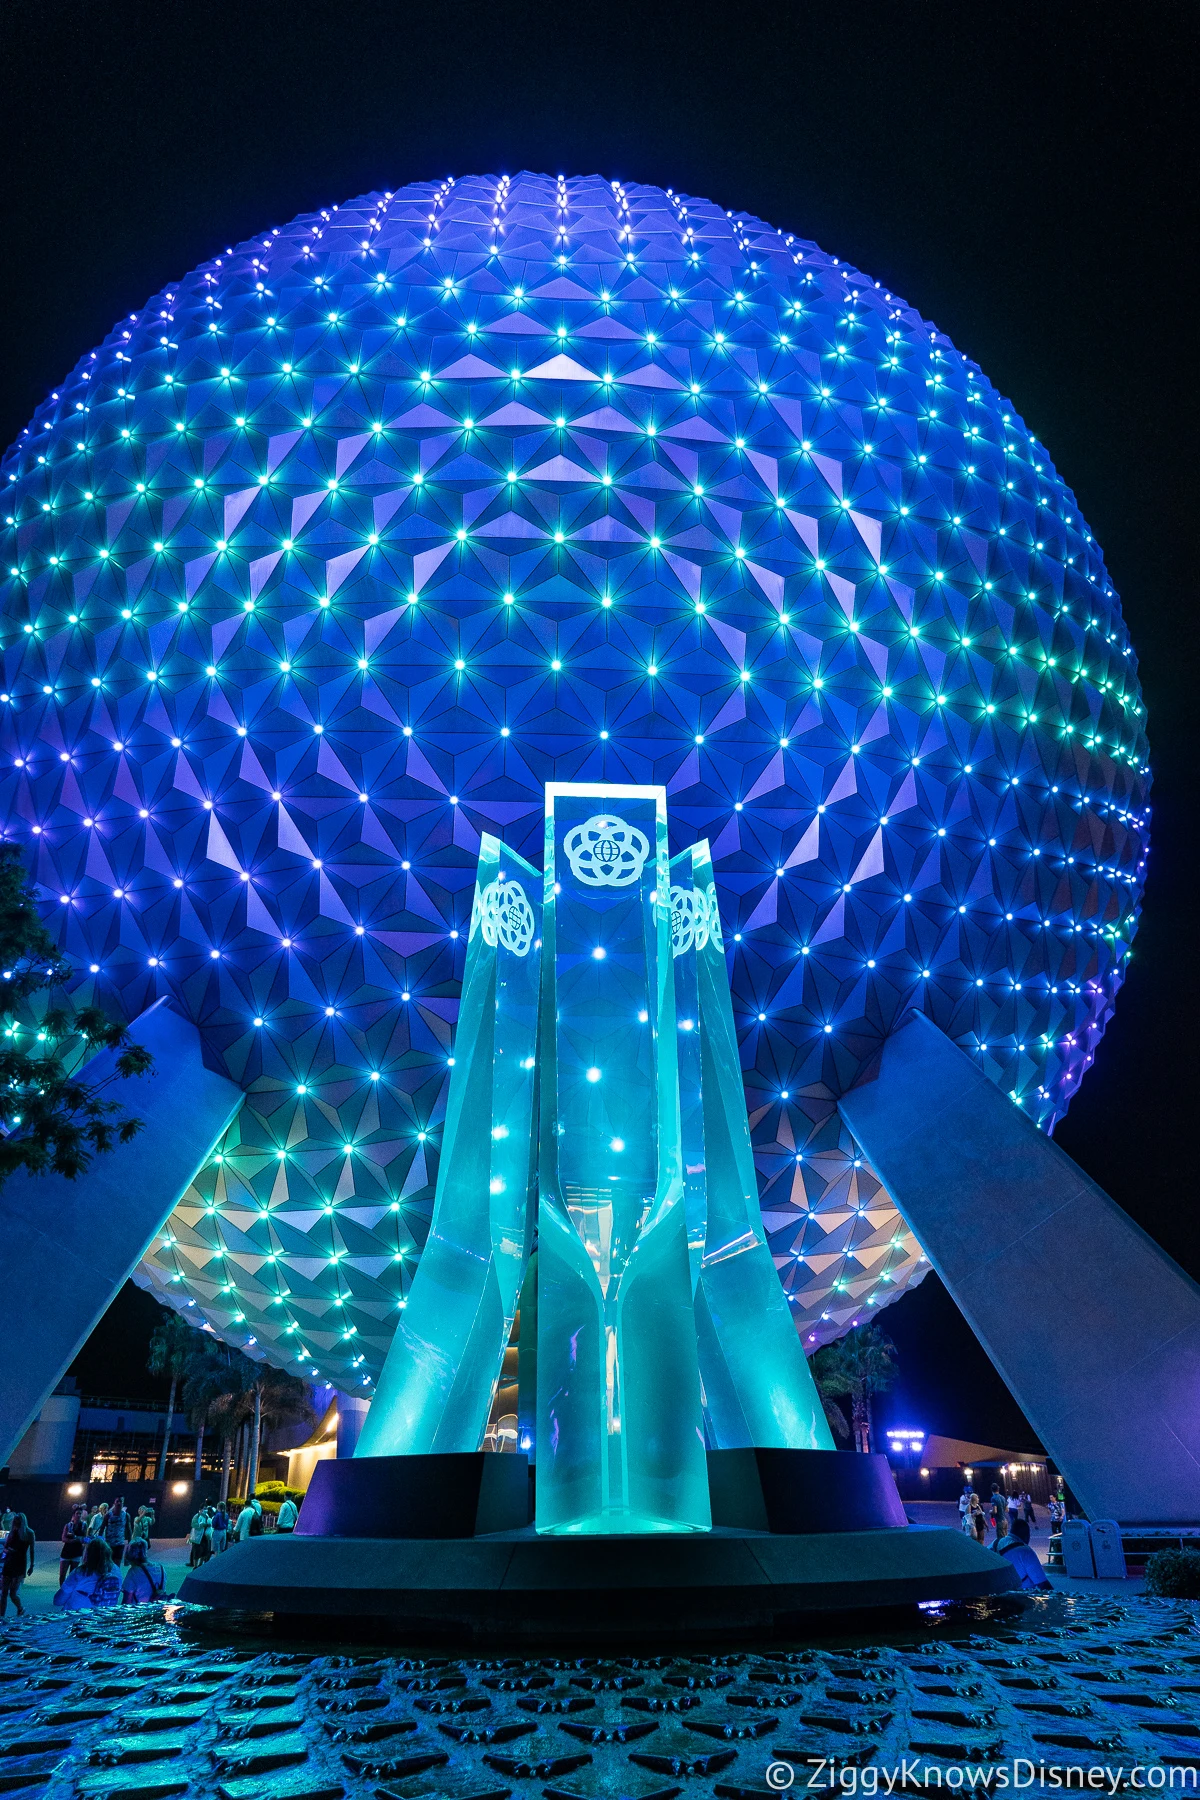 Spaceship Earth EPCOT lit up at night